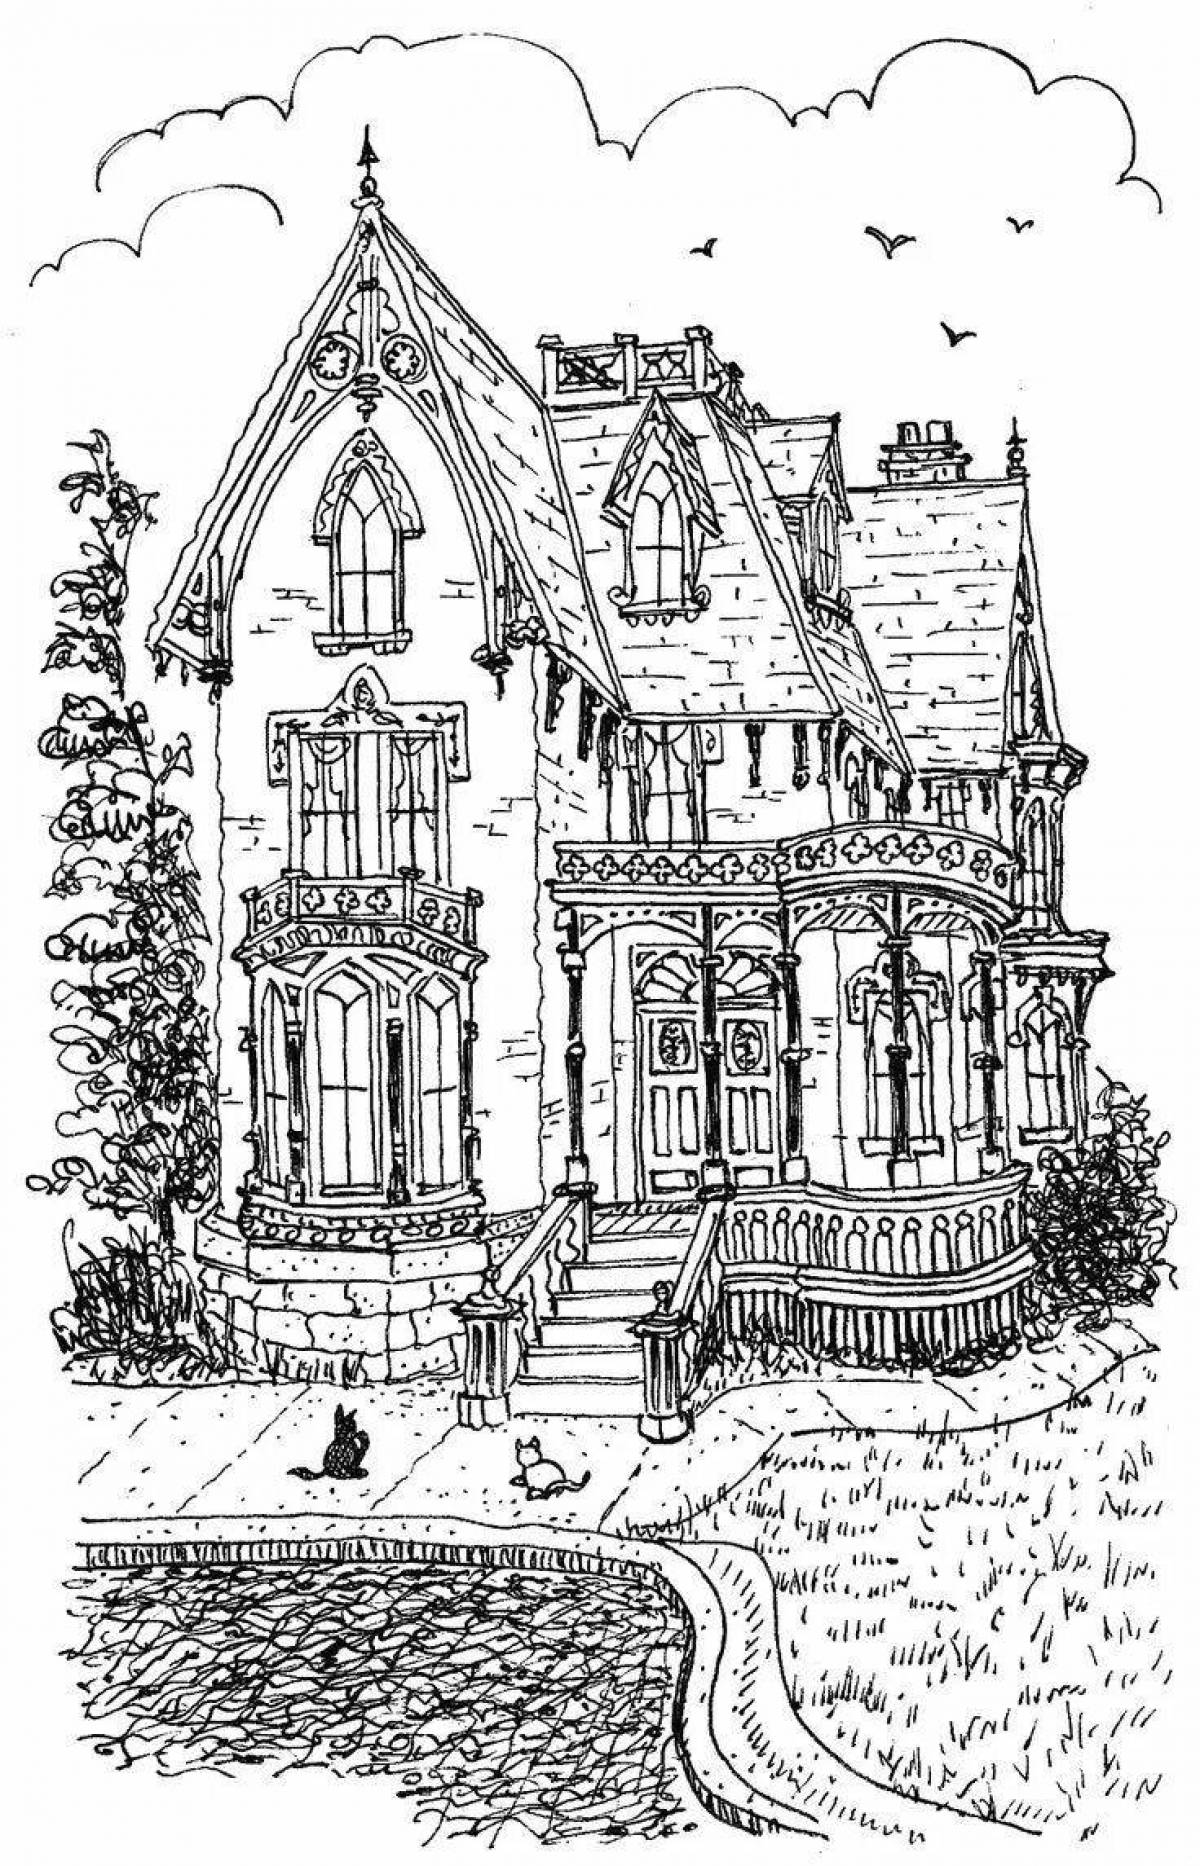 Coloring page of a glamorous rich house